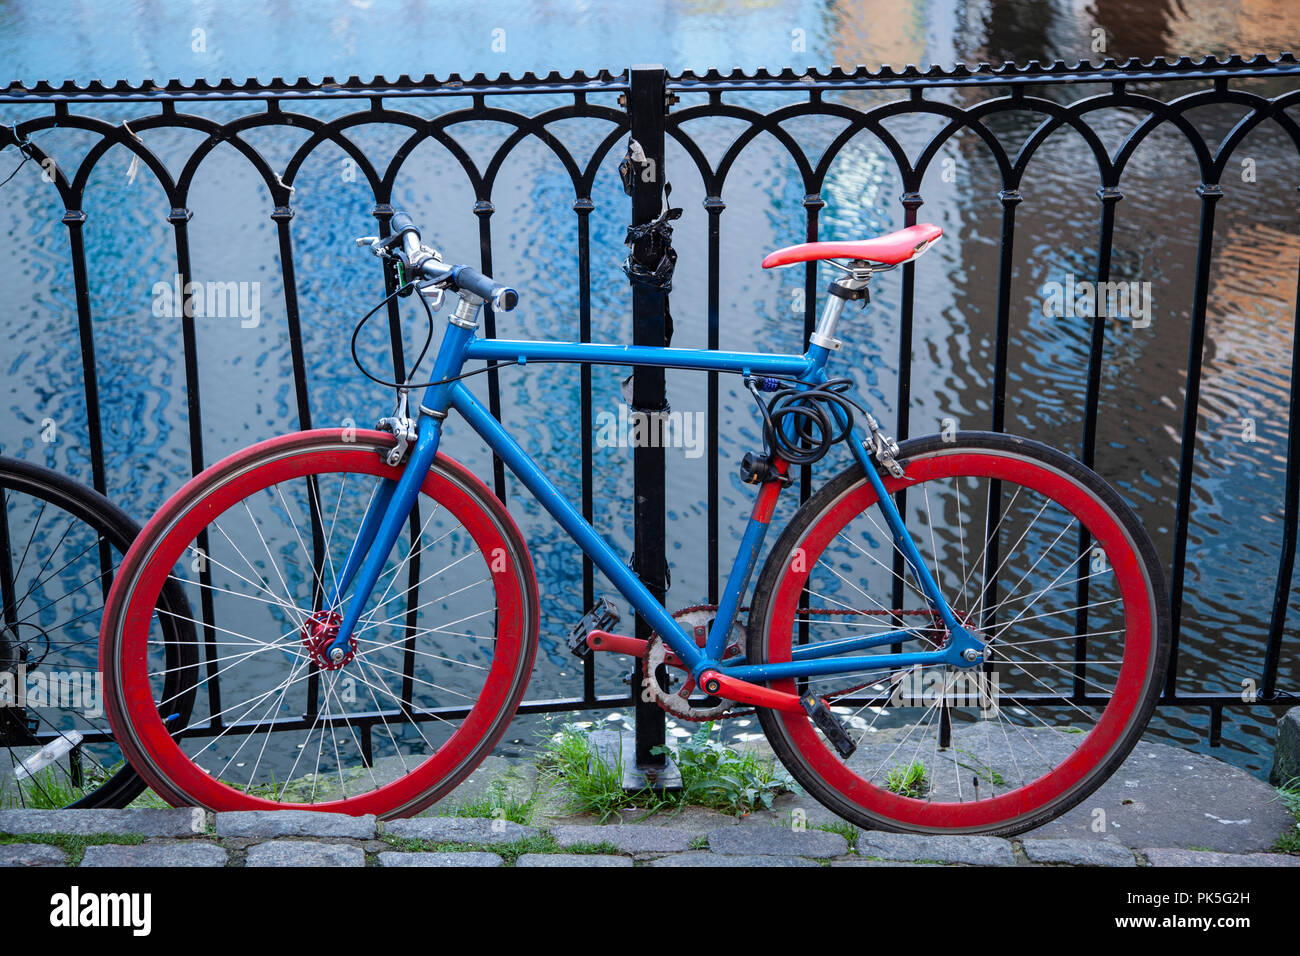 Bicycle with bright blue frame and red wheels leaning against railings beside a canal. Stock Photo